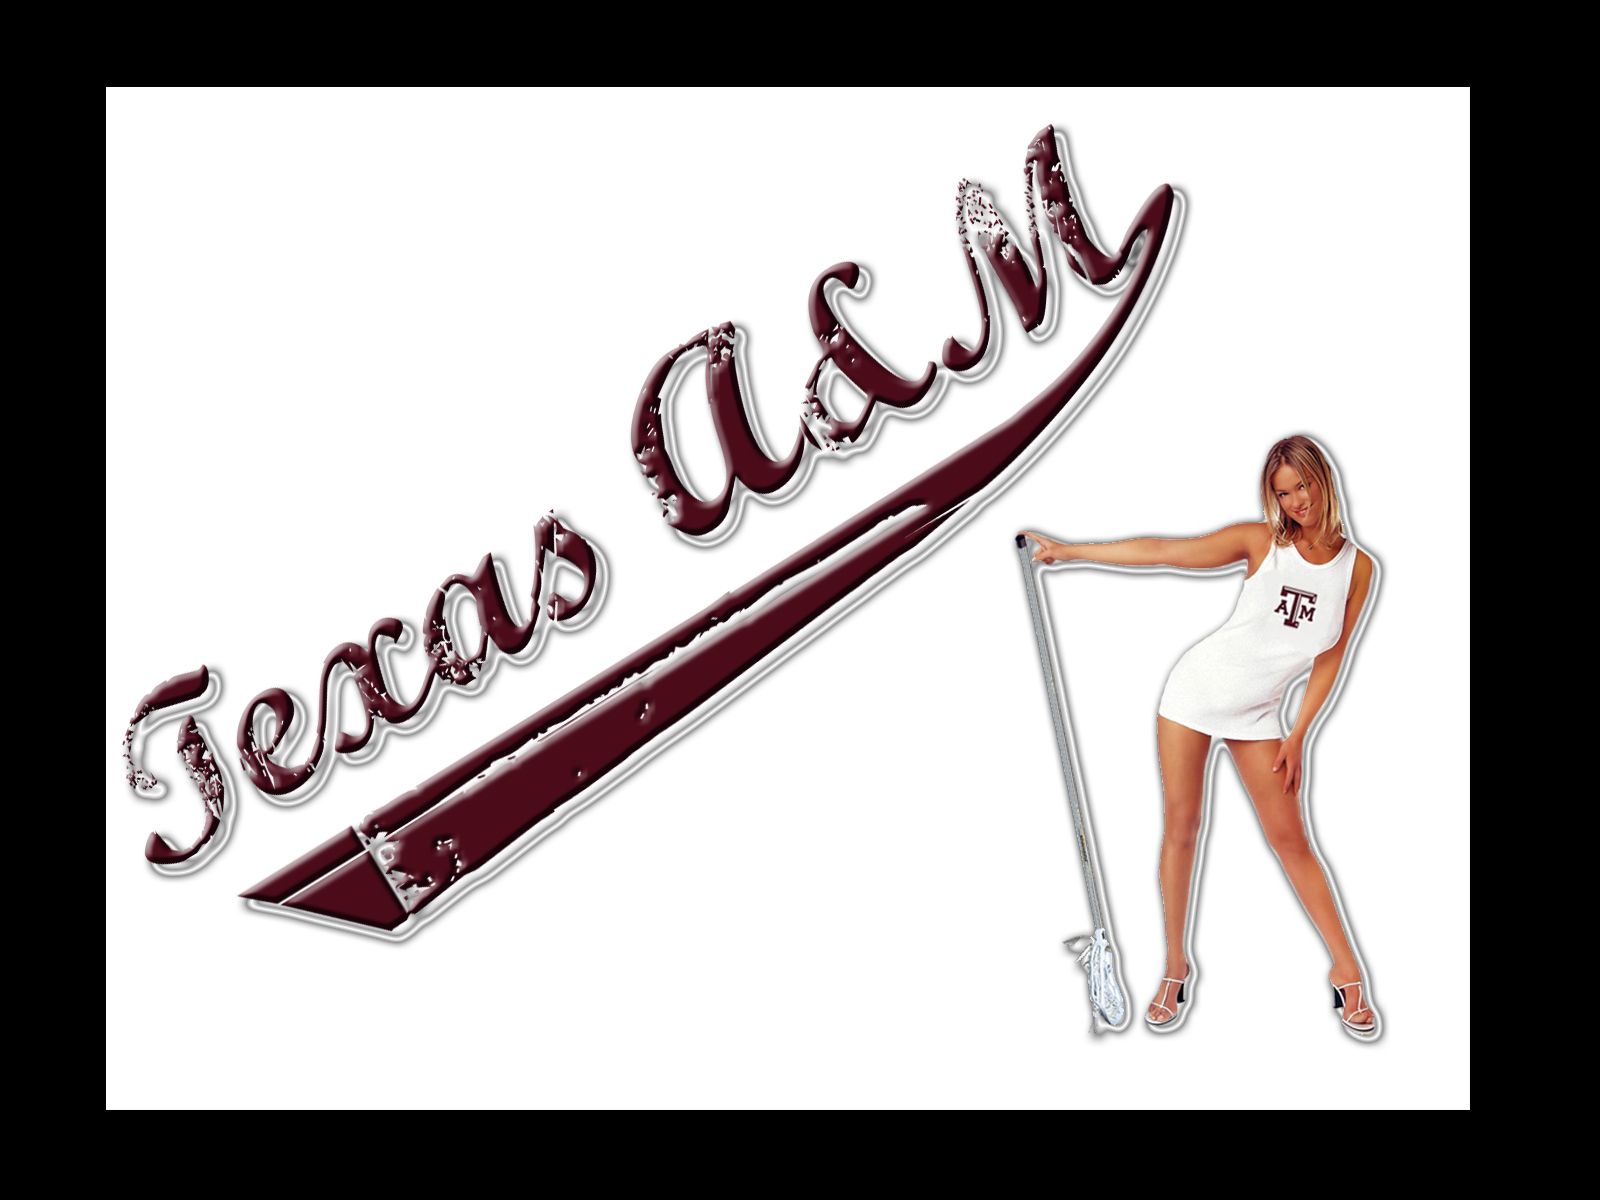 Texas A+M Womens Lacrosse by bh06there on DeviantArt